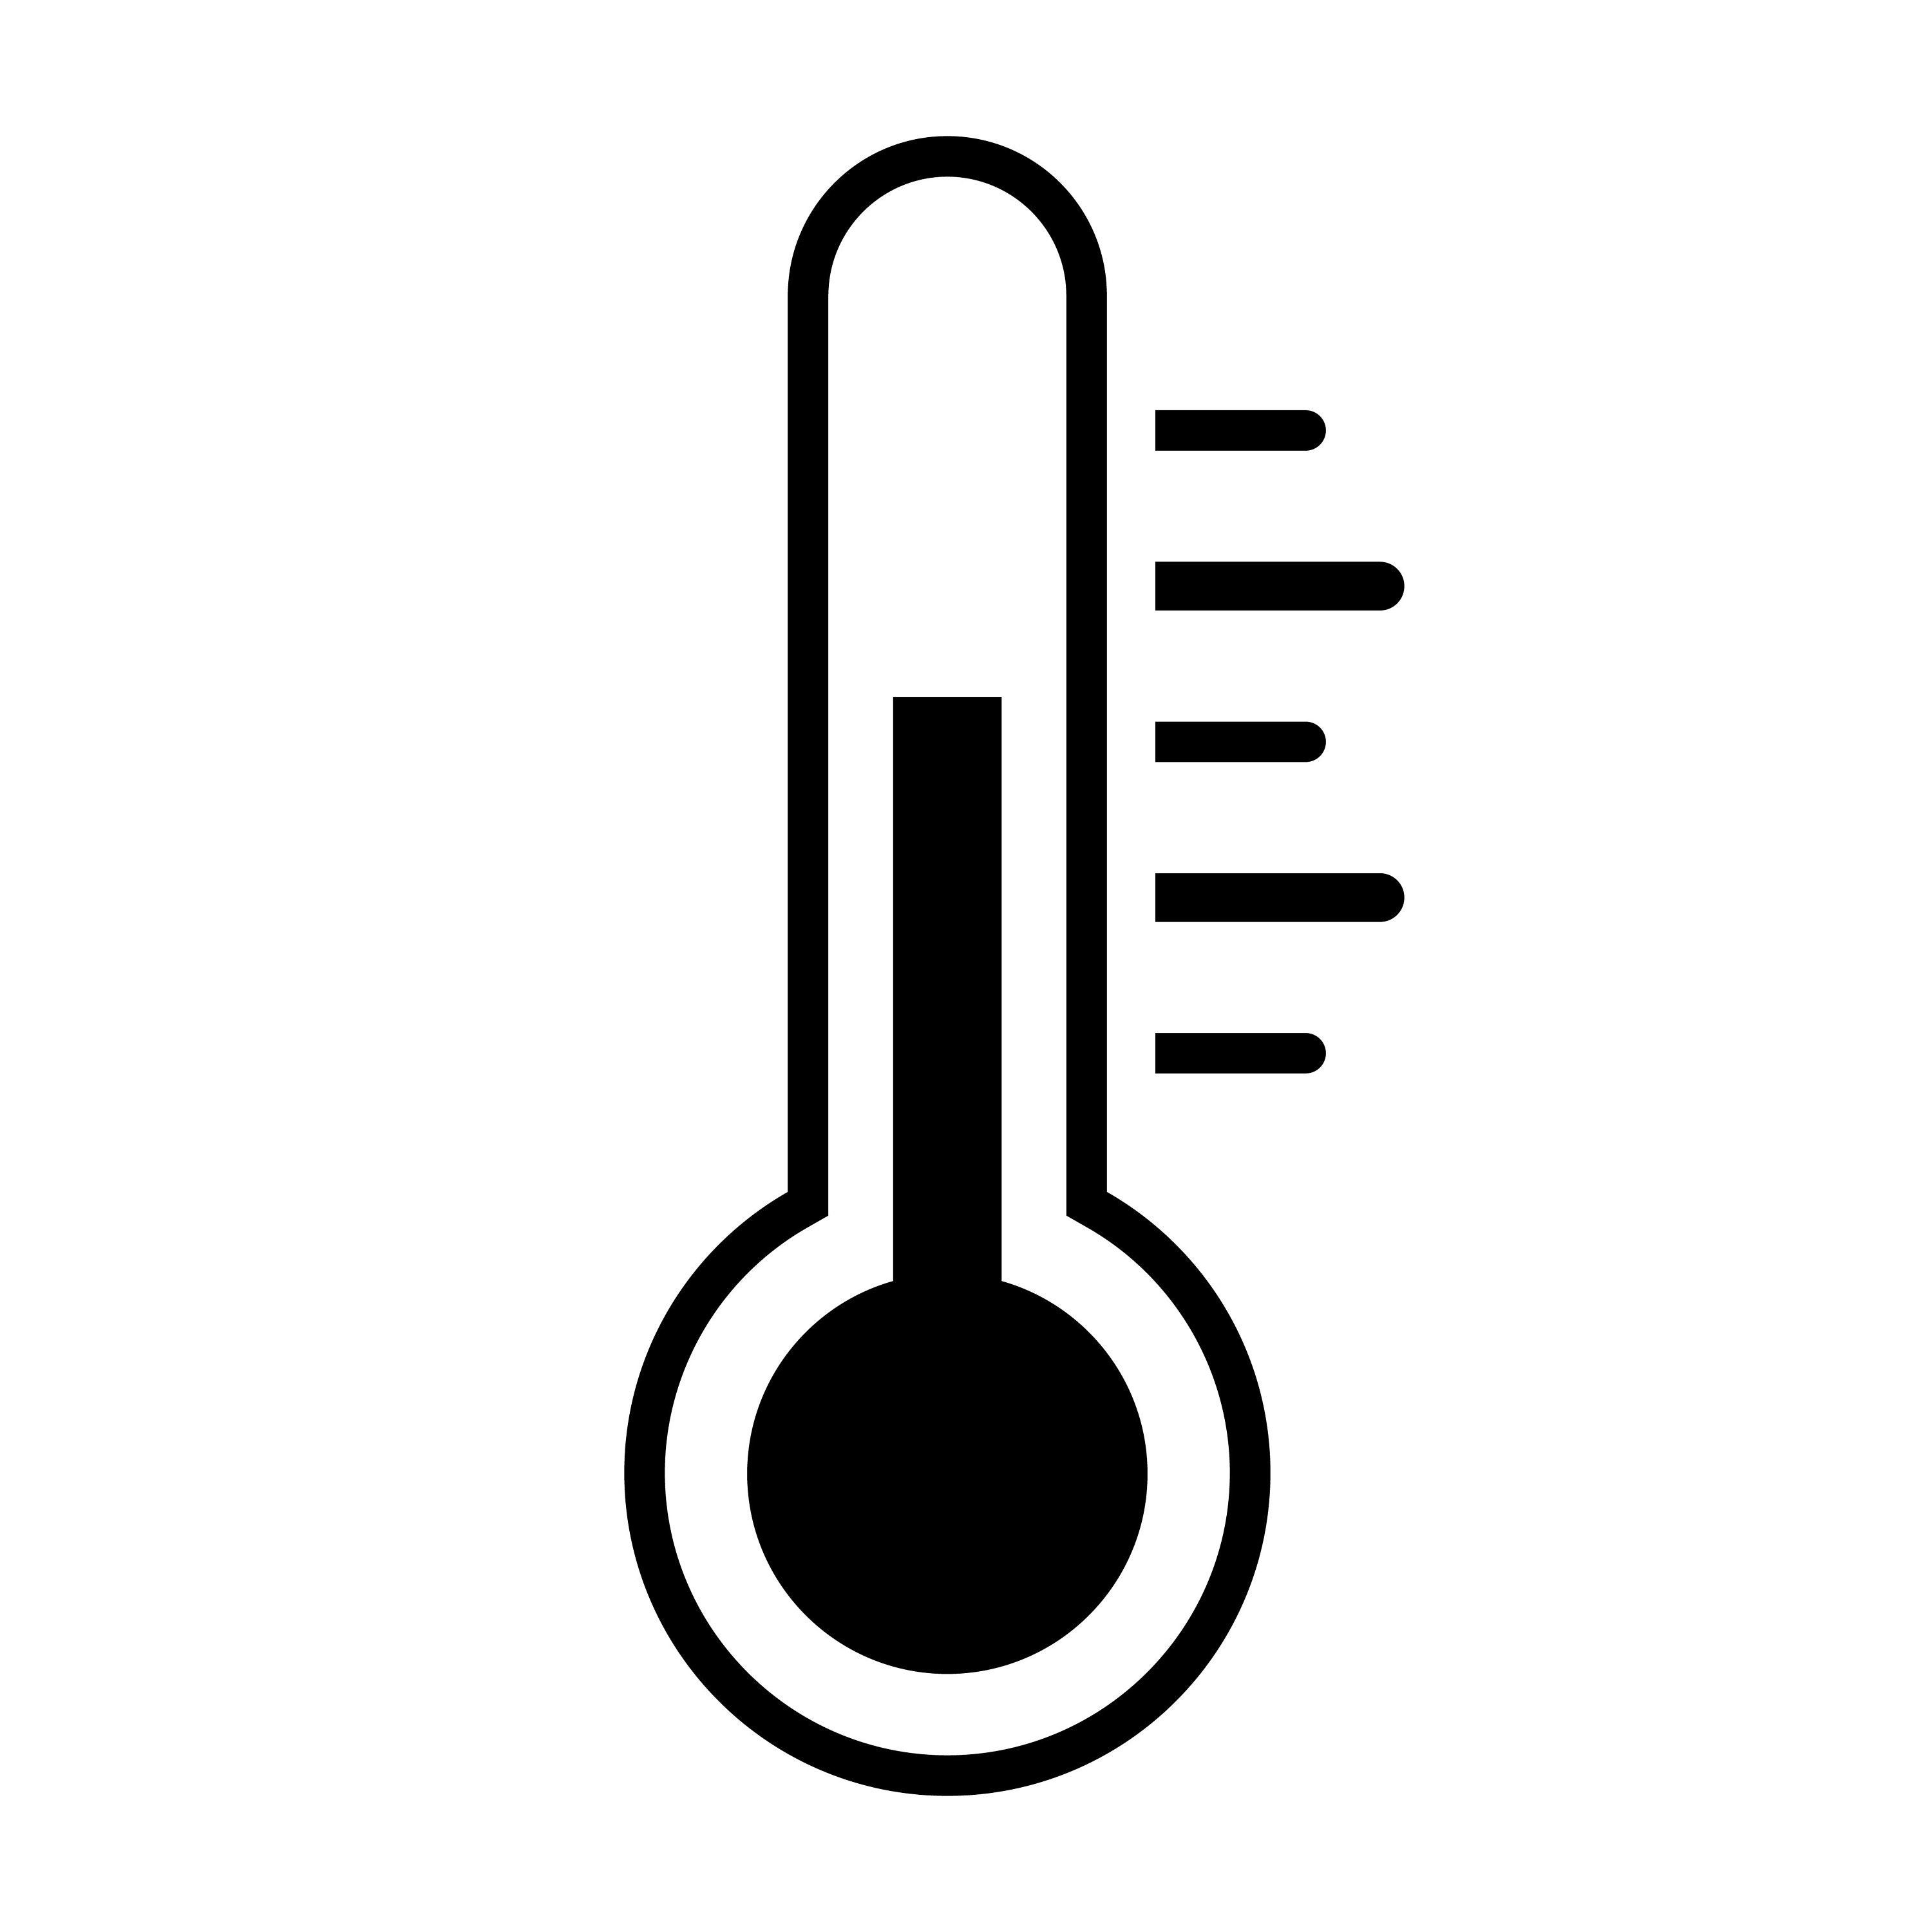 Heat thermometer and sun icon on a white Vector Image